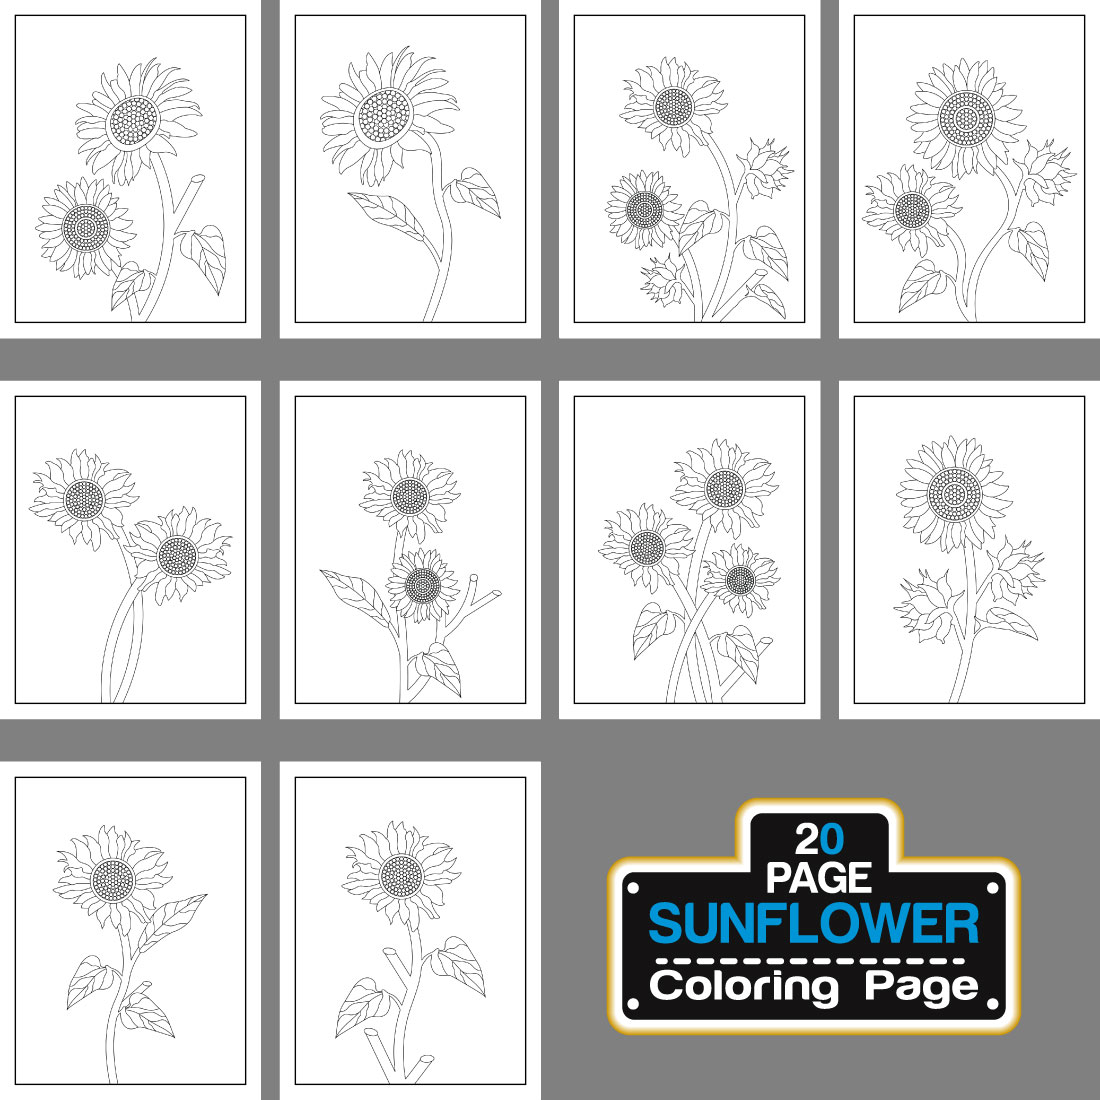 Sunflower coloring page and book hand drawn line art illustration